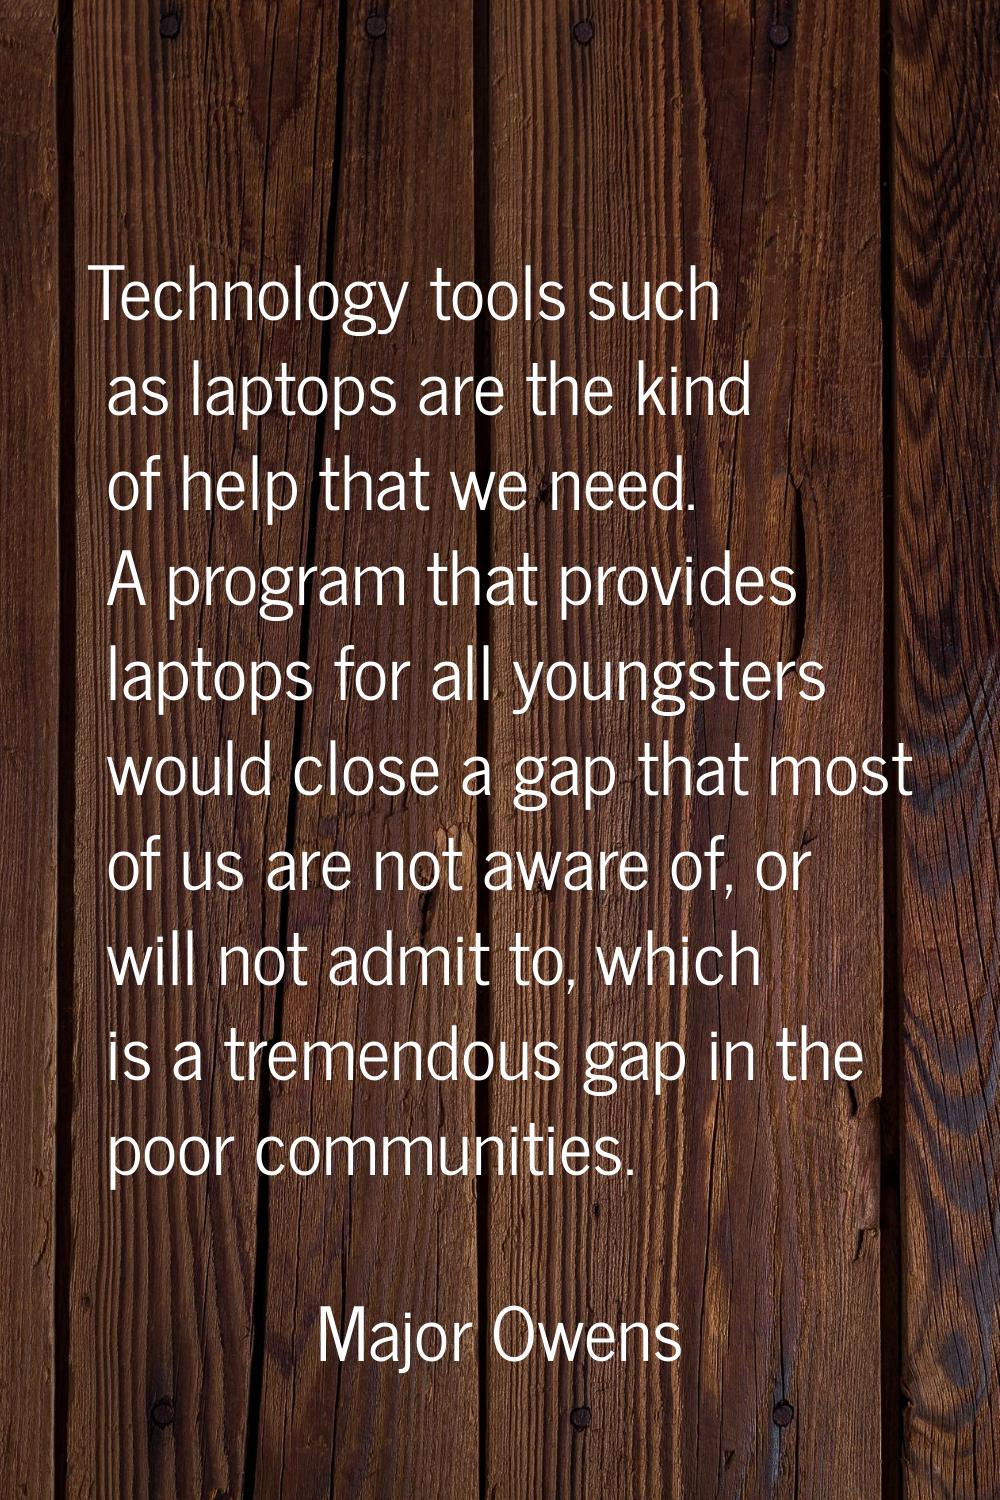 Technology tools such as laptops are the kind of help that we need. A program that provides laptops